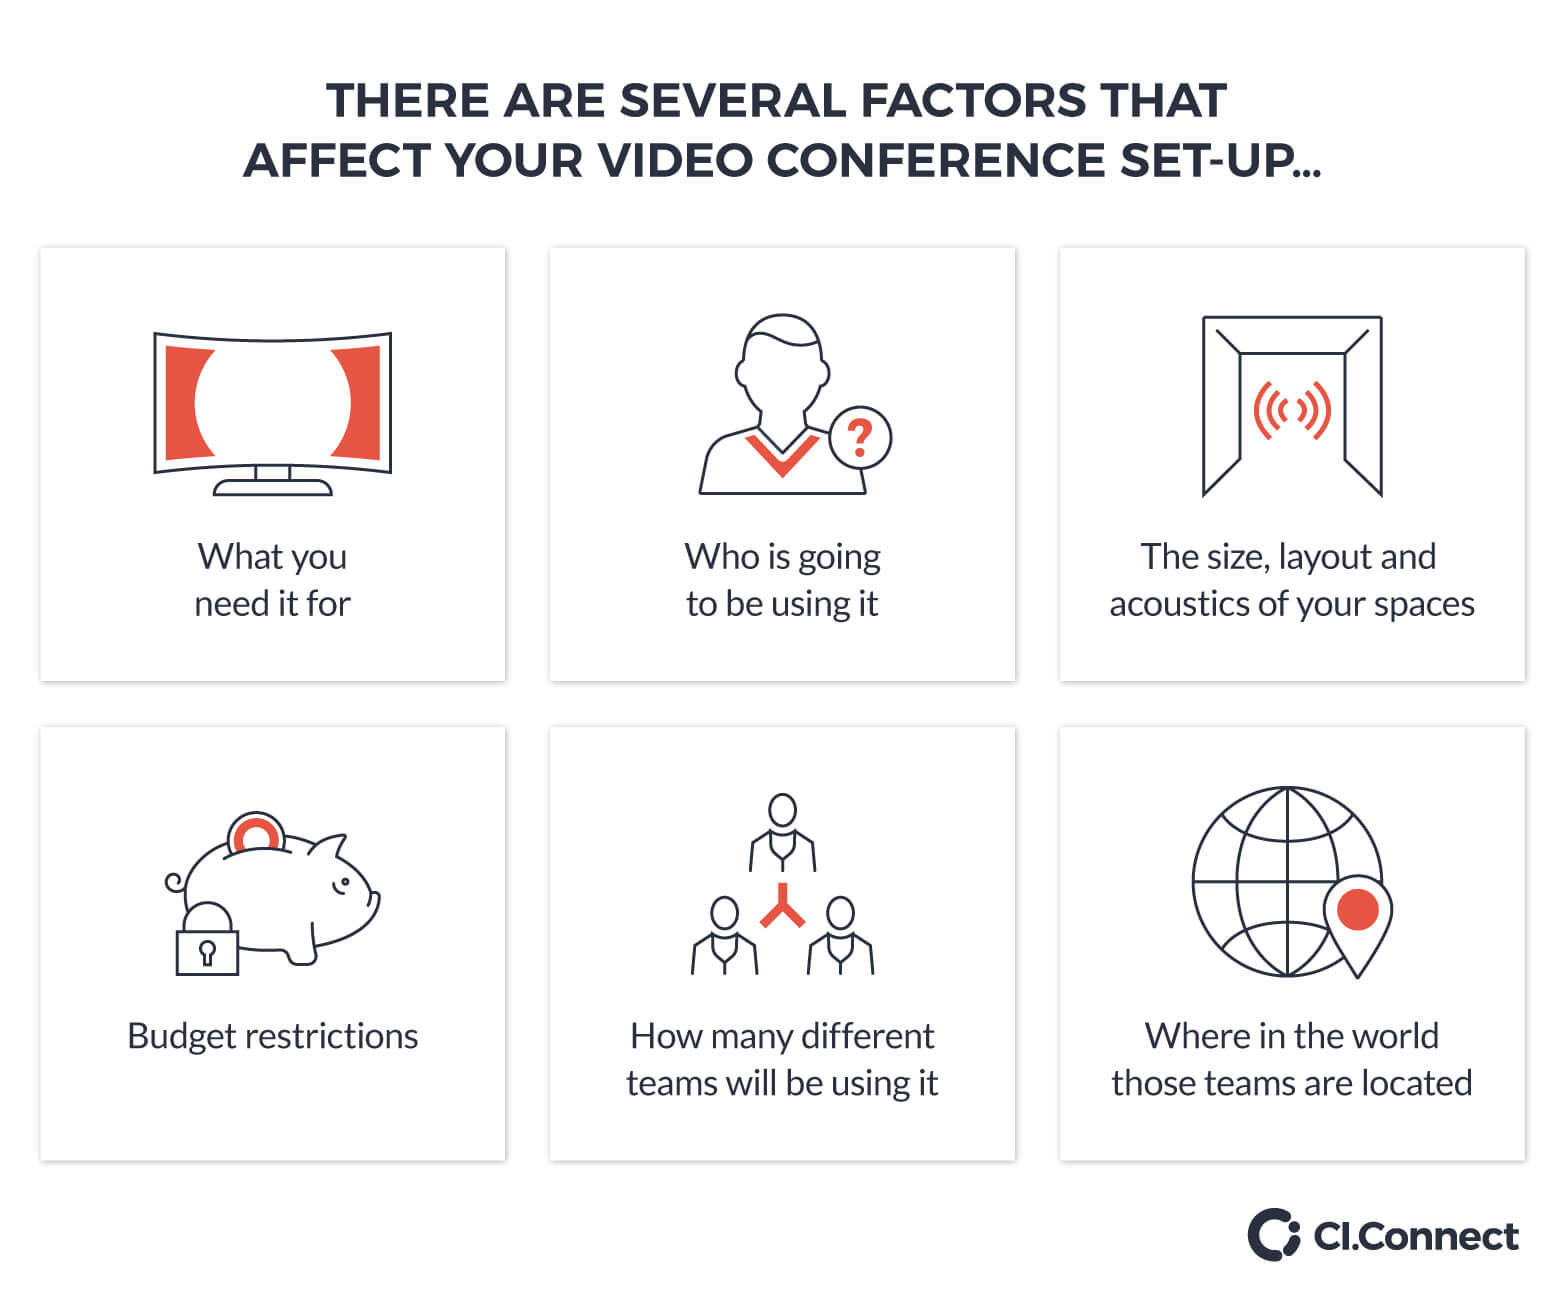 Factors affecting your video conference set-up